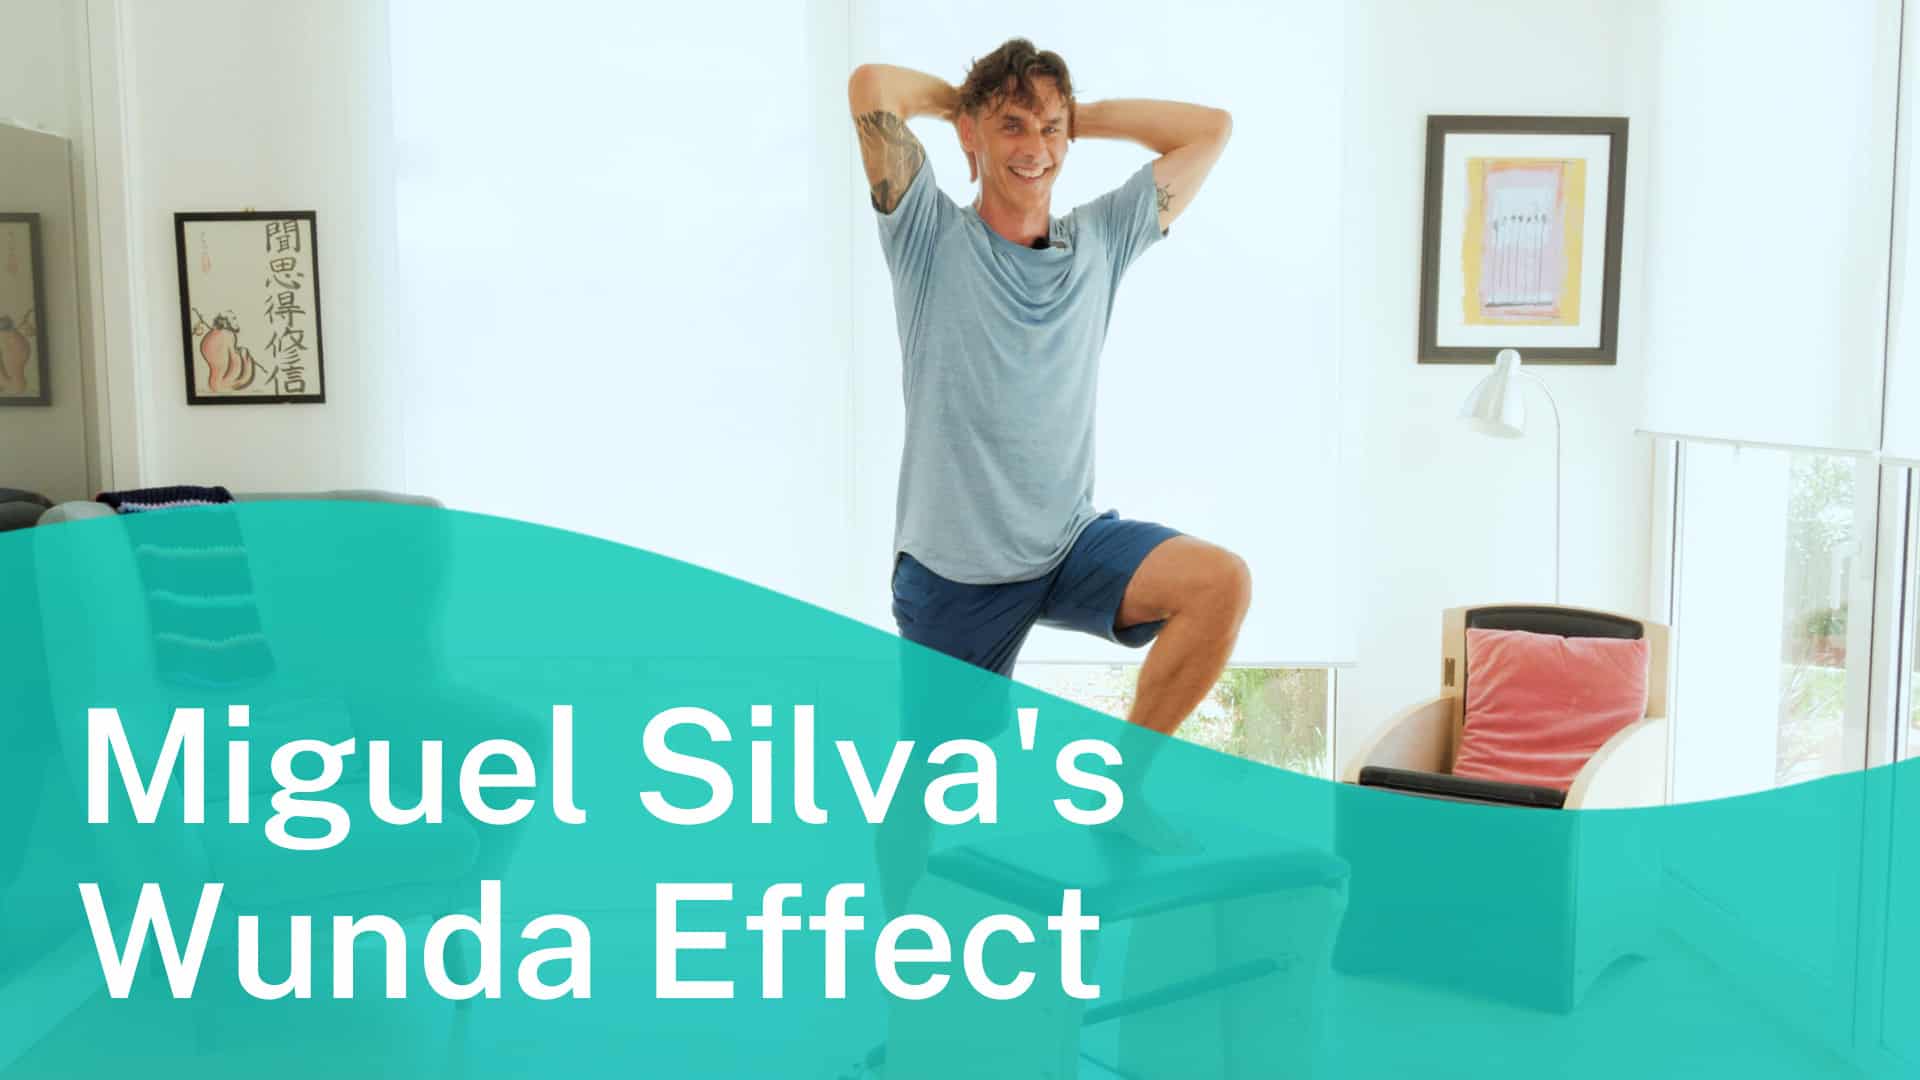 Wunda Chair Workout Series with Miguel Silva